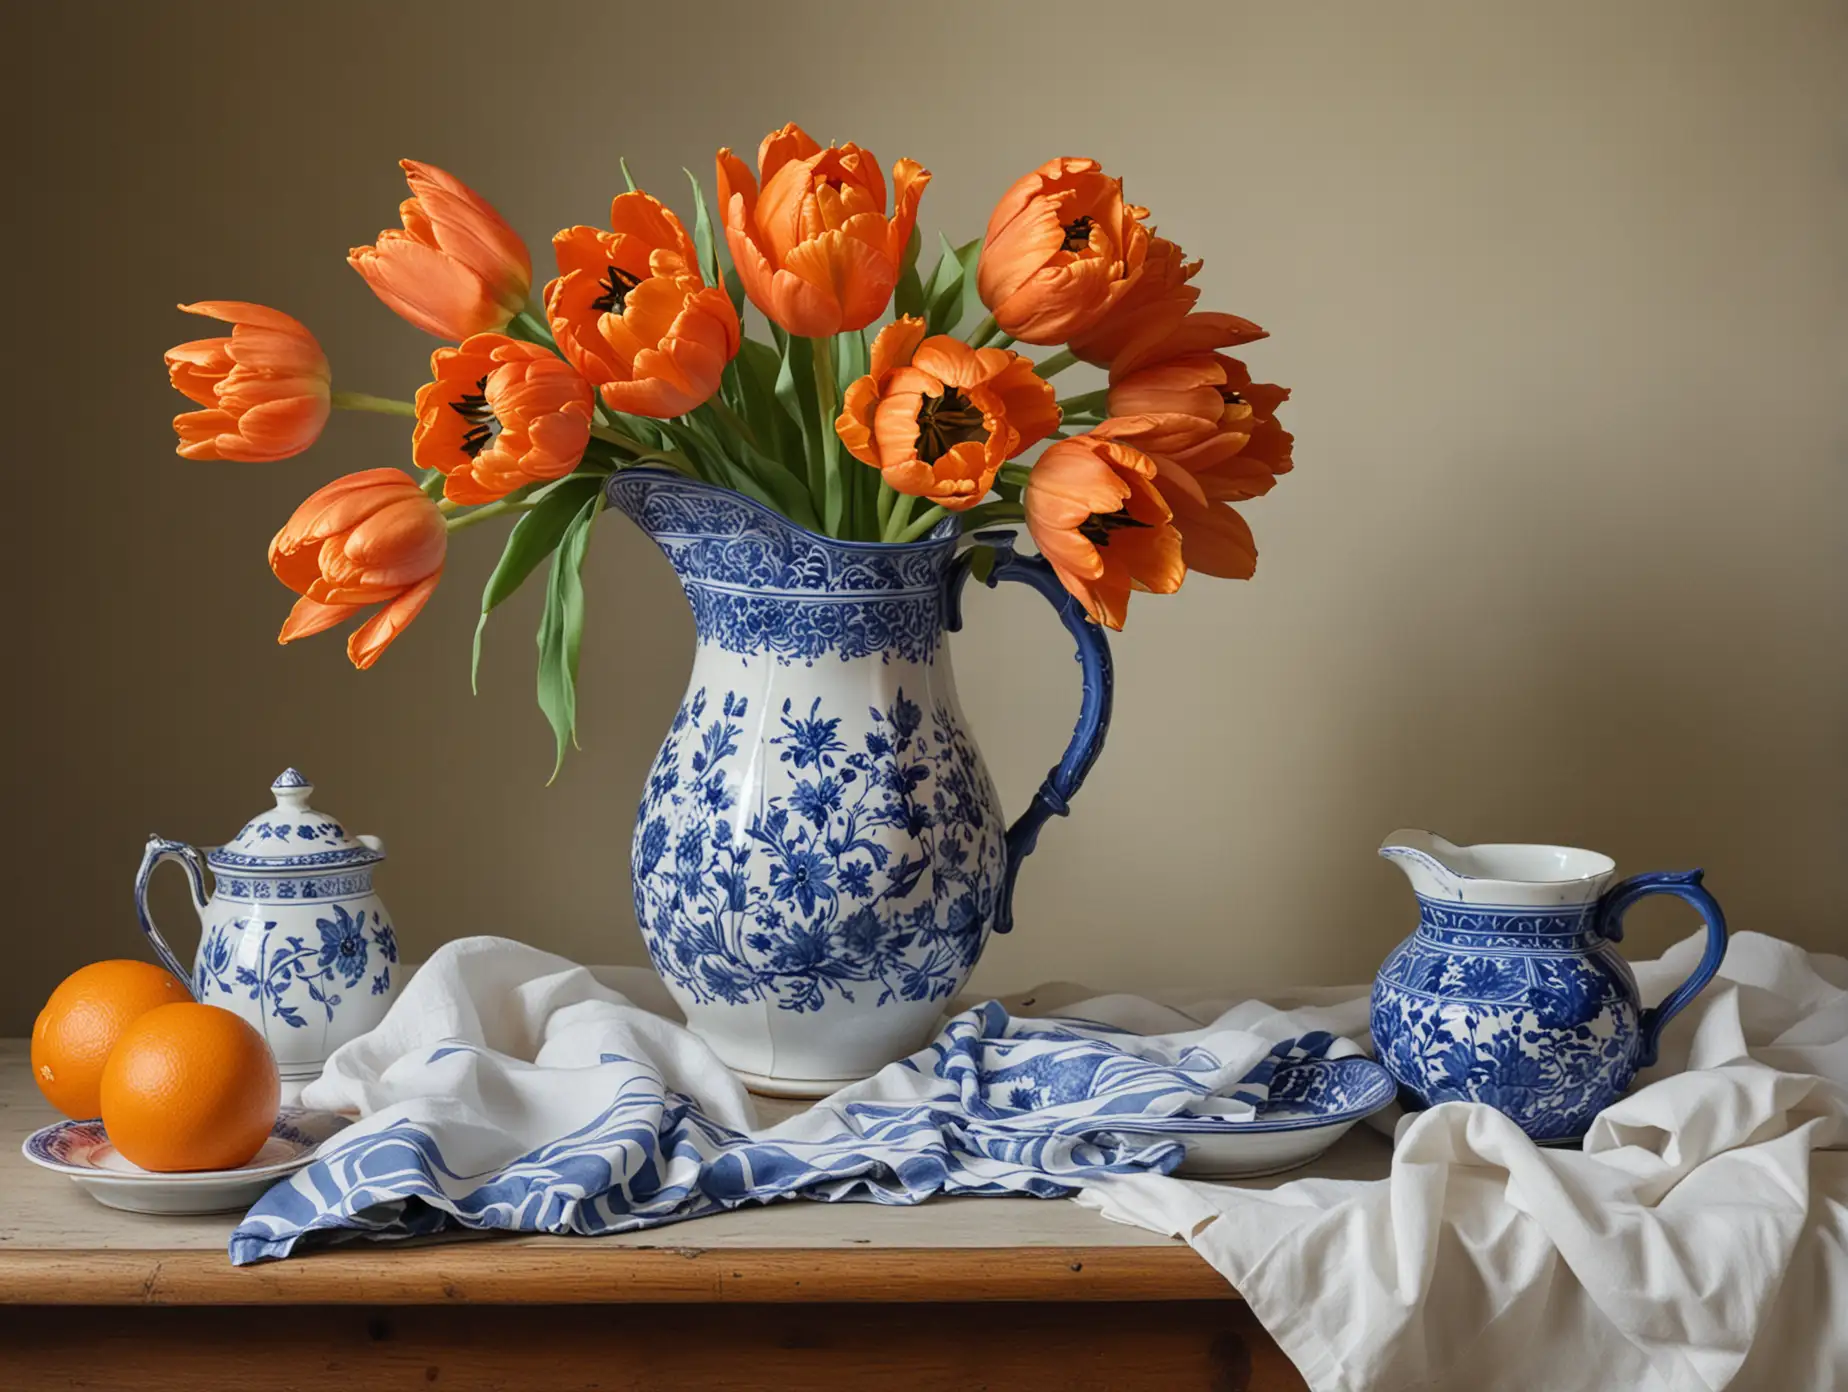 A STILL LIFE PAINTING, WITH A BLUE AND WHITE CHINA PITCHER ON A TABLE, WITH A CLOTH AND ORANGES ON THE TABLE  WITH ORANGE TULIPS IN THE PITCHER